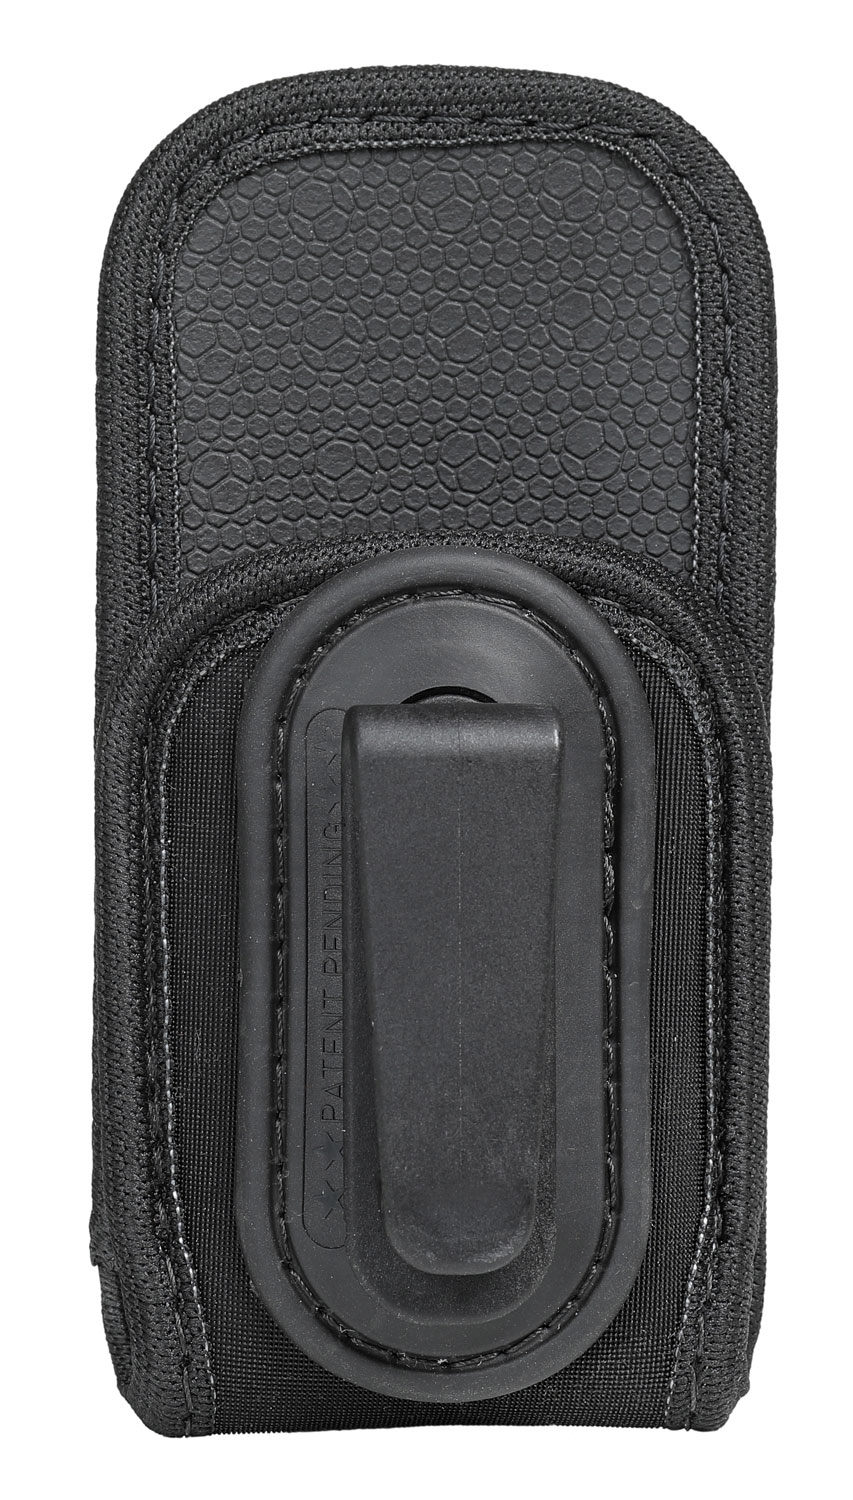 Alien Gear Holsters GMDSS Grip Tuck Mag Carrier IWB Style made of Neoprene with Black Finish & Belt Clip compatible with Short Length Double Stack Mags (Short Length = 4.25